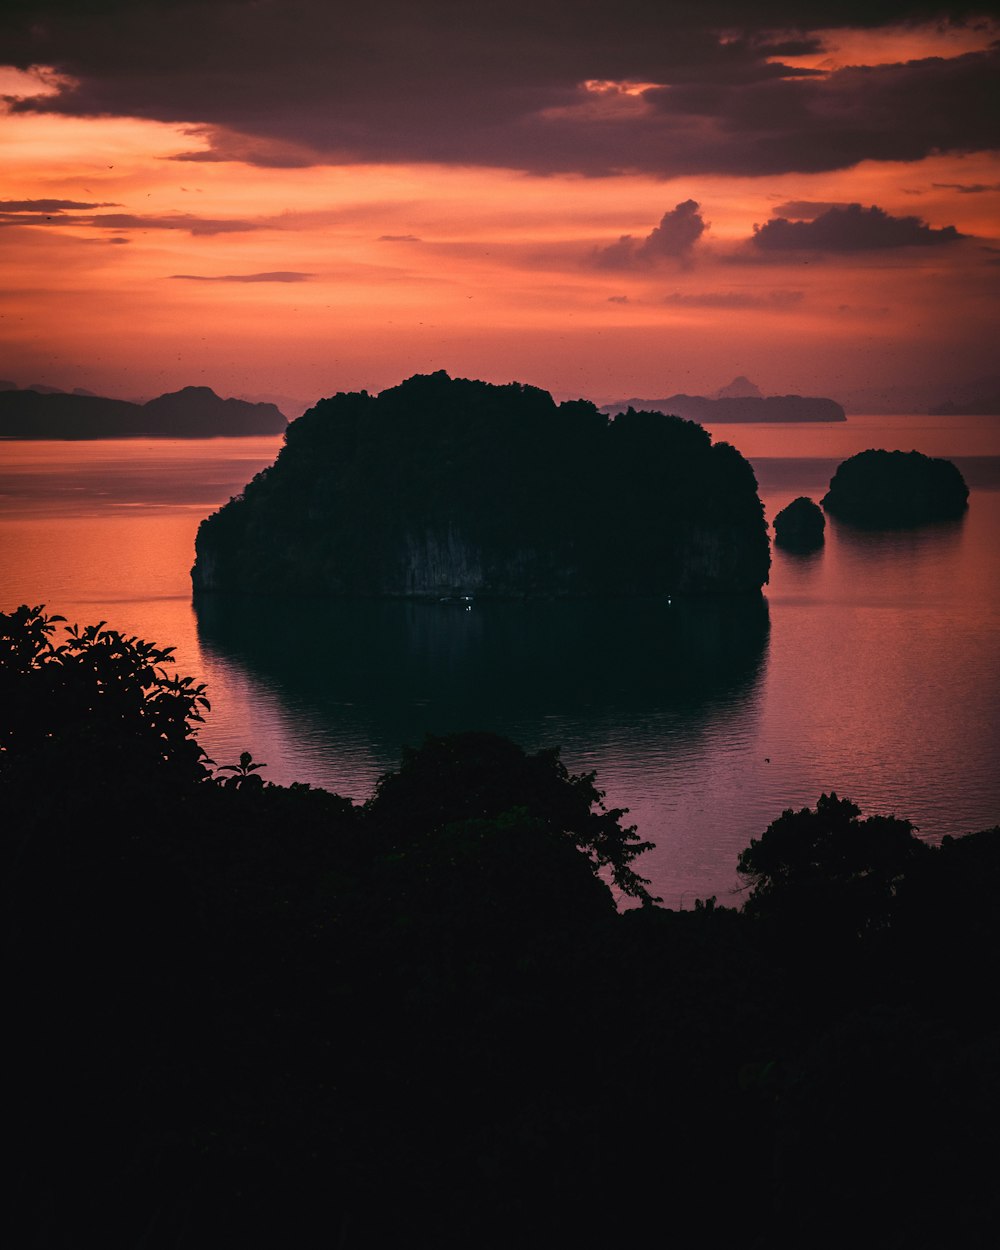 a sunset view of a small island in the middle of the ocean